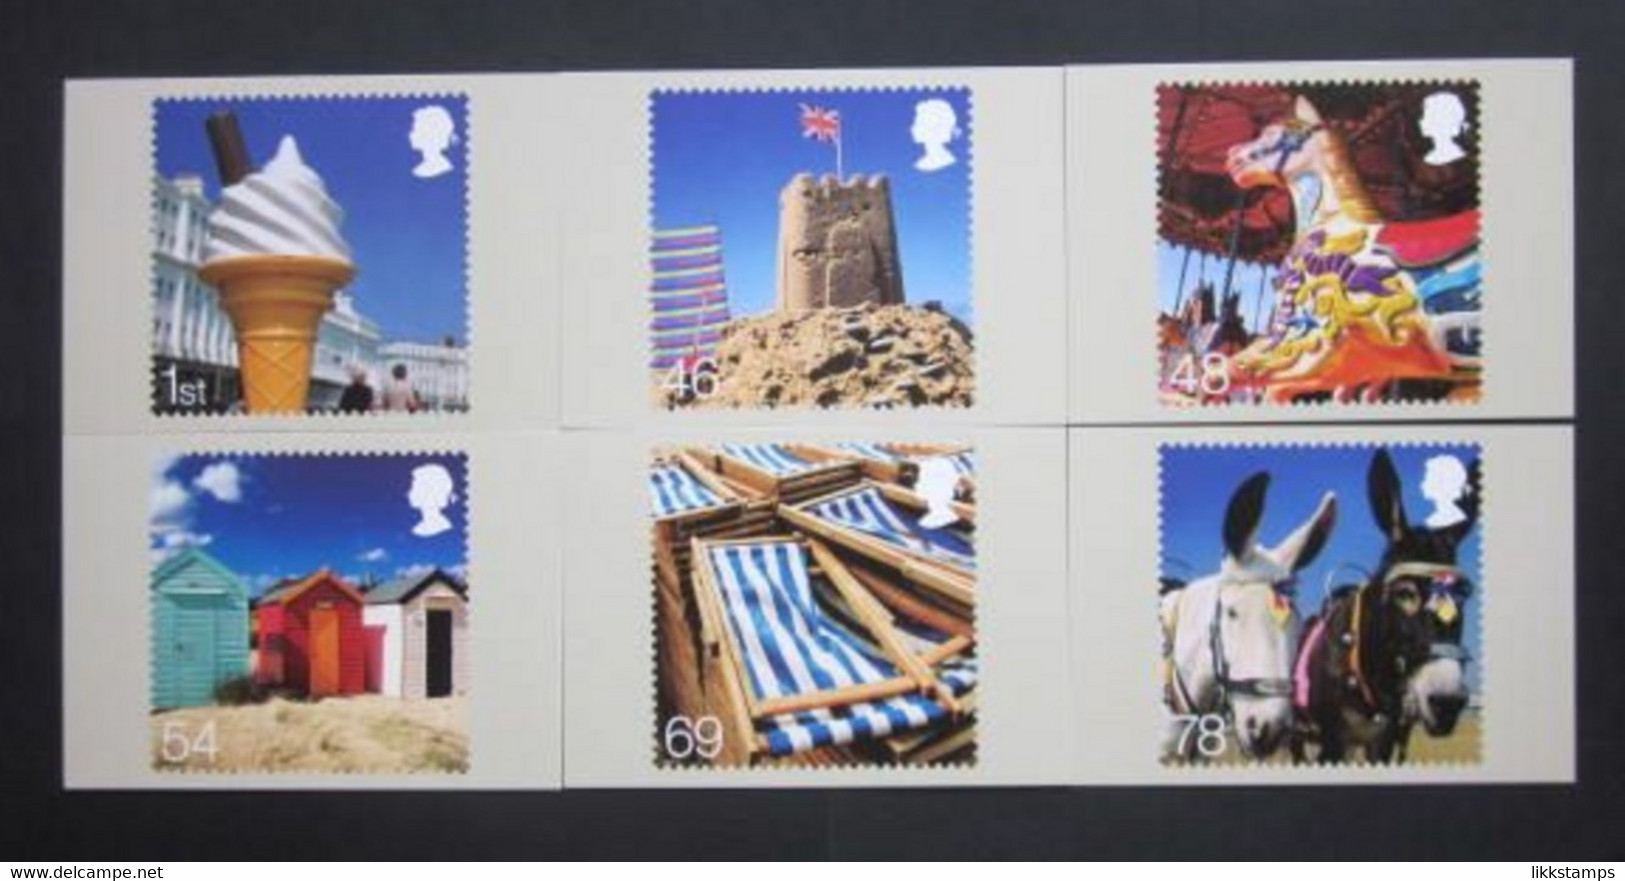 2007 'BESIDE THE SEASIDE' P.H.Q. CARDS UNUSED, ISSUE No. 298 (B) #00740 - PHQ Karten